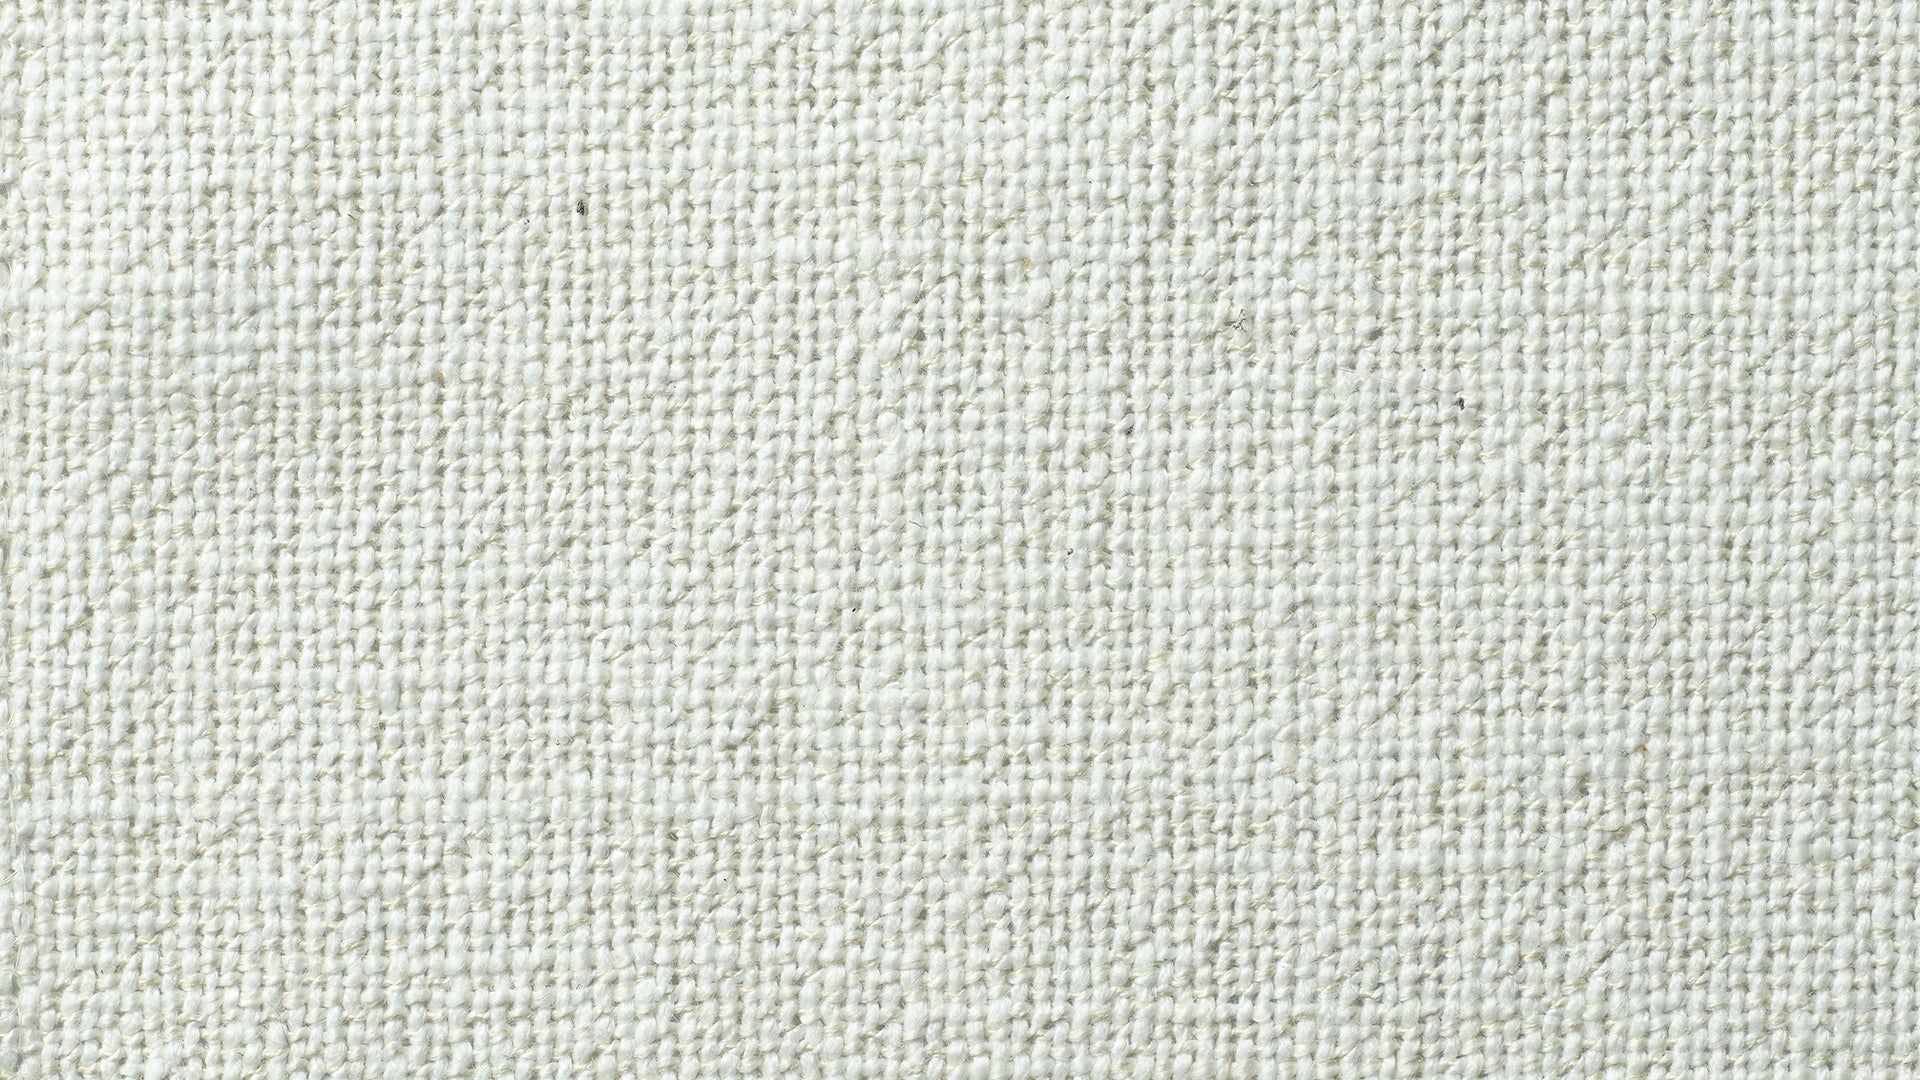 Swatch Camembert LiveLife™ Performance Fabric - Image 1